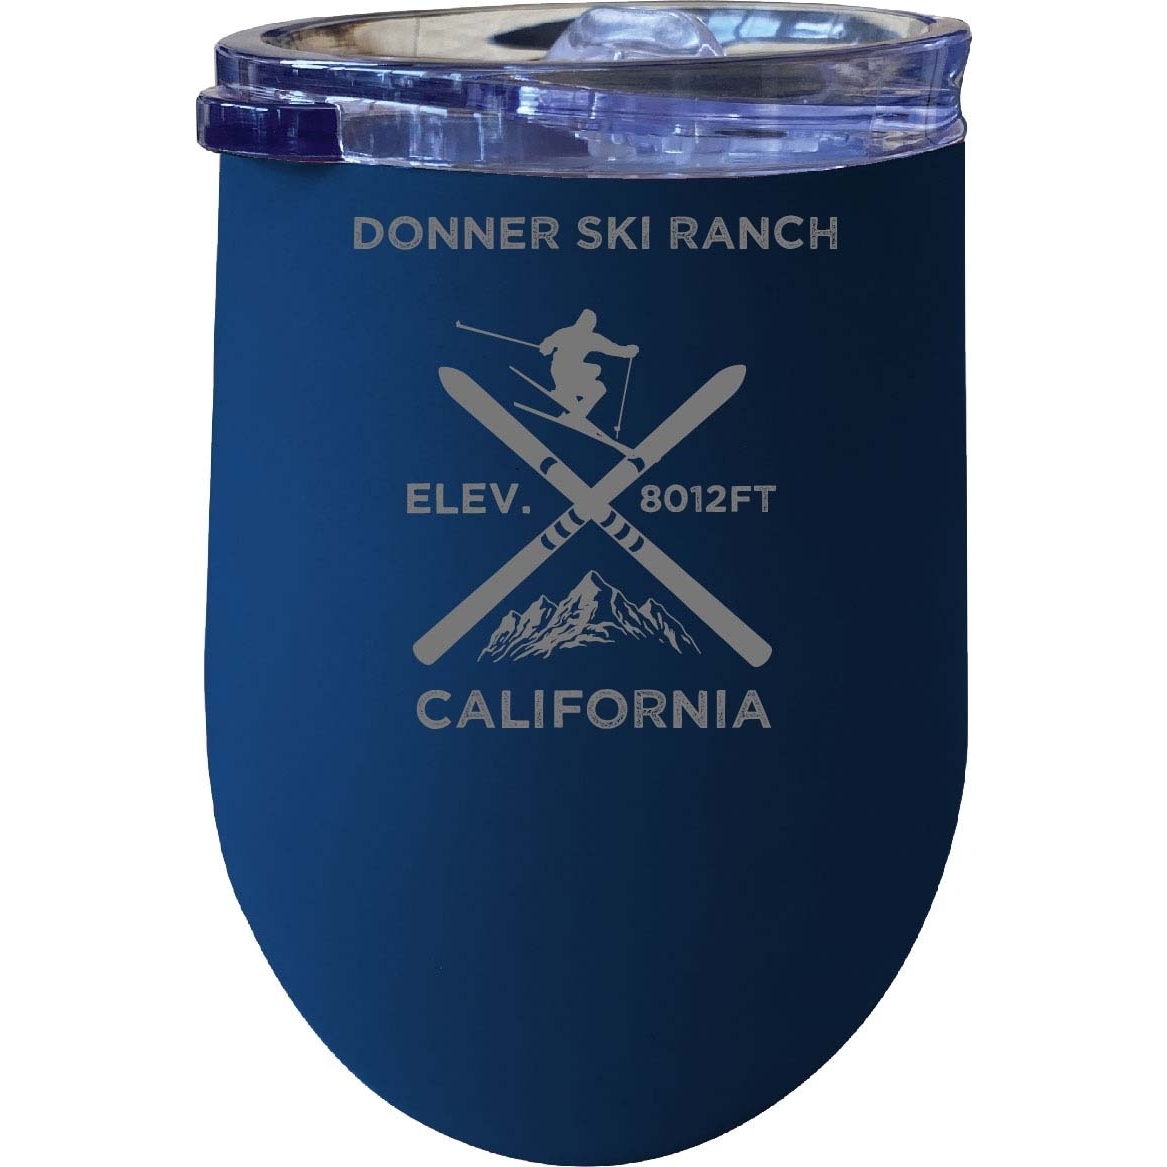 Donner Ski Ranch California Ski Souvenir 12 Oz Laser Etched Insulated Wine Stainless Steel Tumbler - Rose Gold